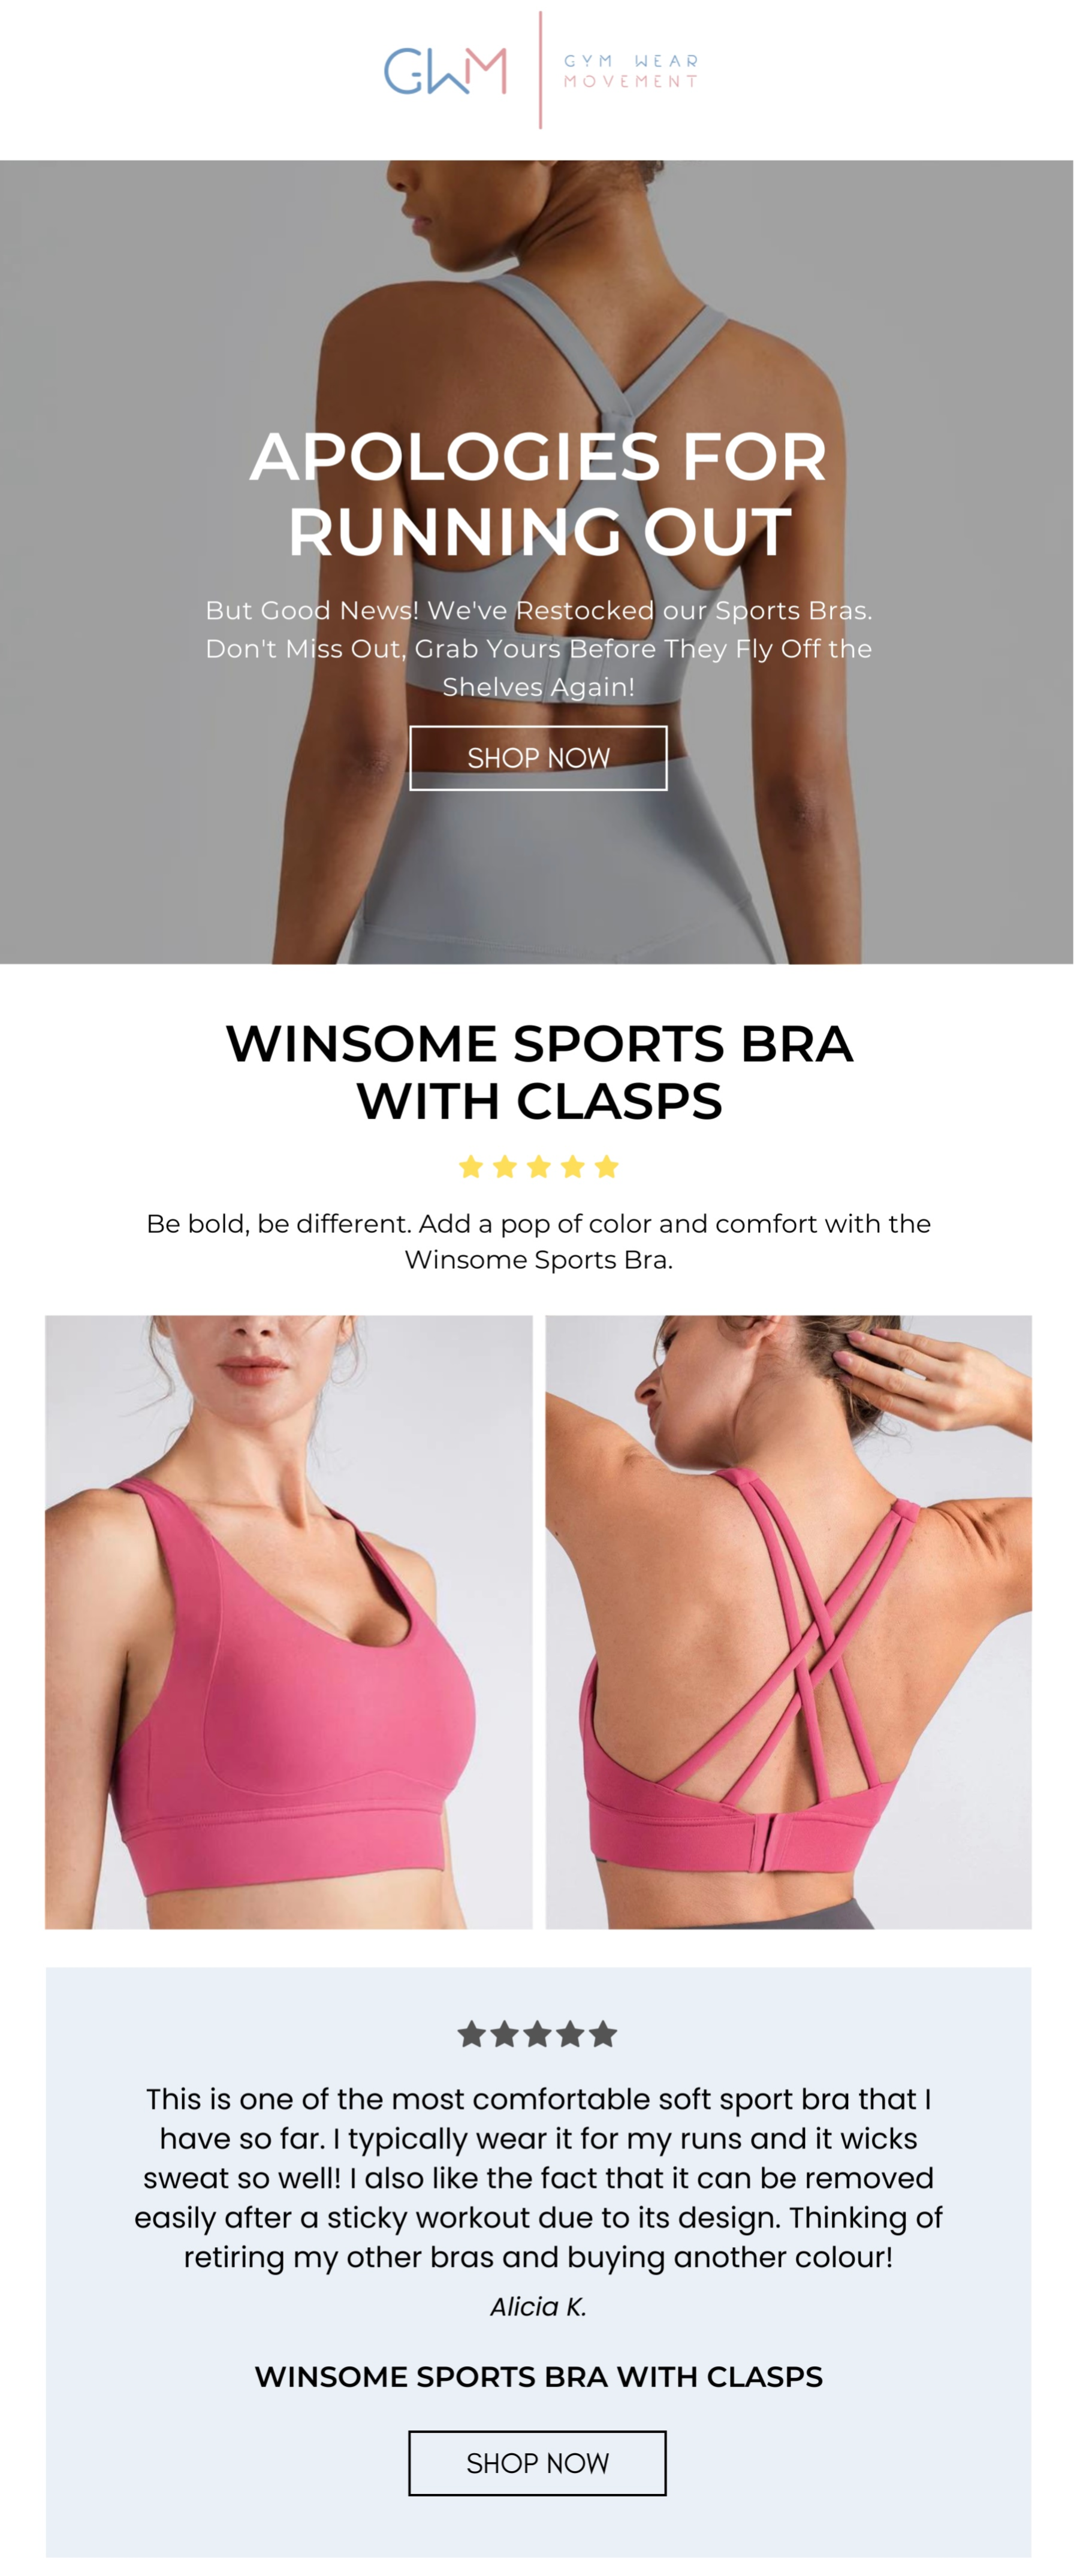 GEAR UP: THE TOP 4 BESTSELLING BRAS ARE RESTOCKED - Gym Wear Movement